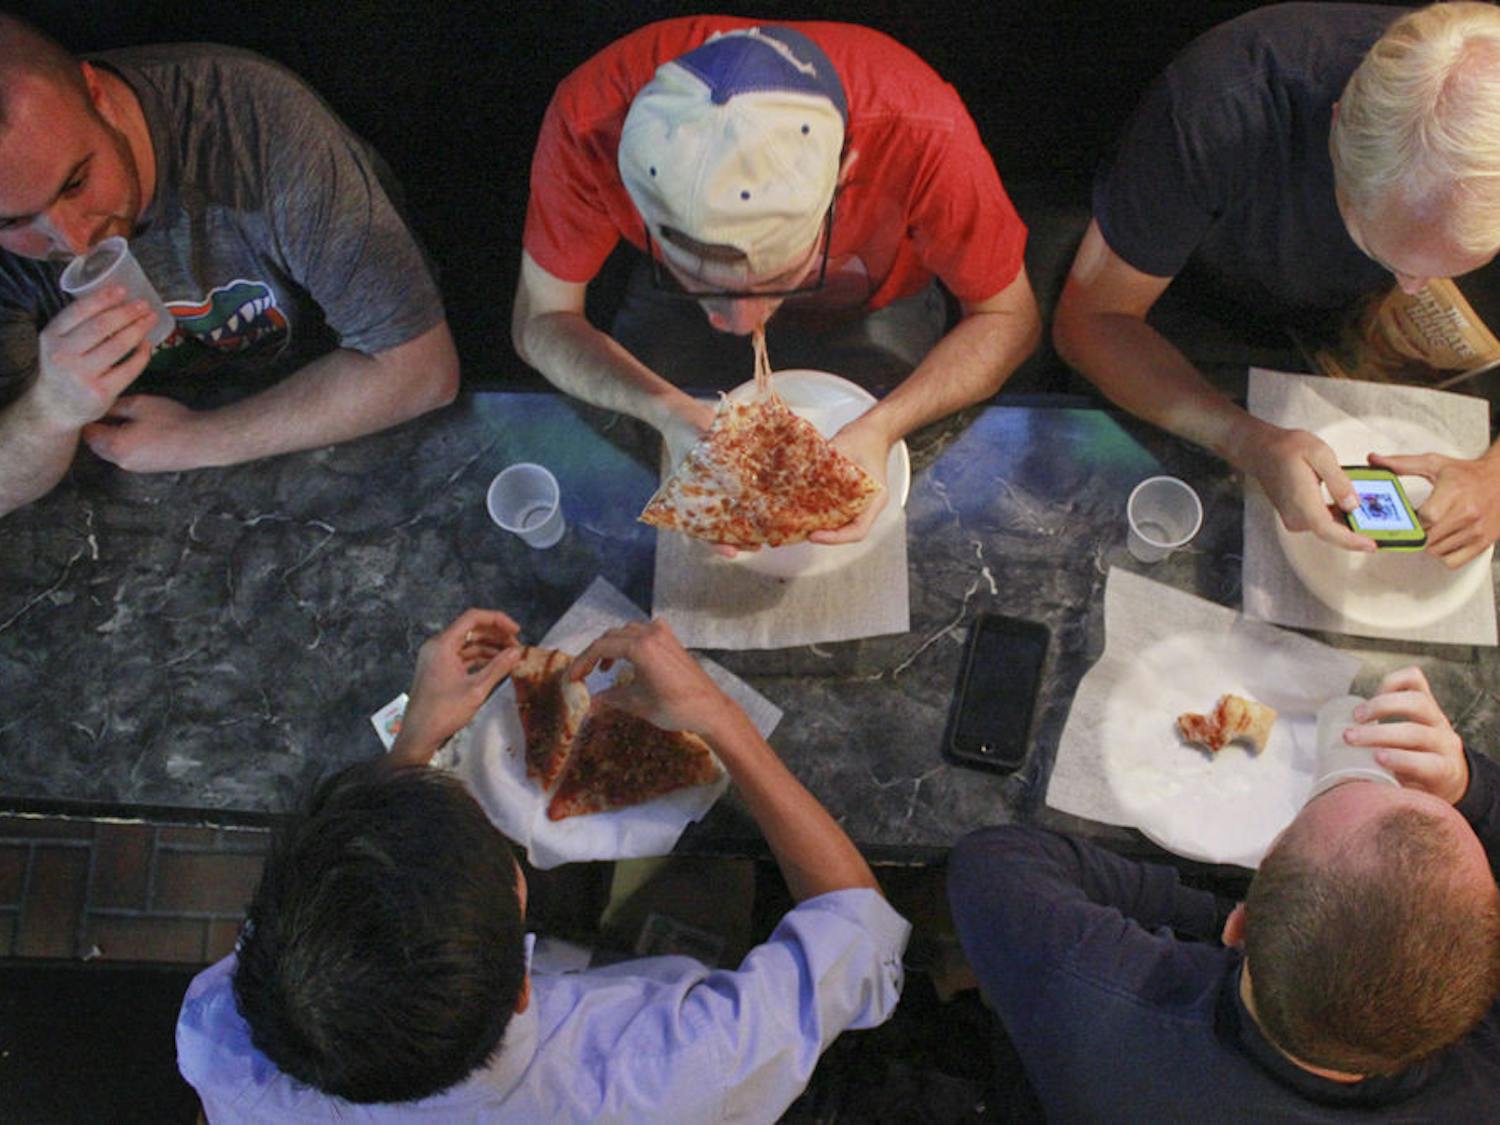 Alex Landry (top center), a 23-year-old UF alum, chews cheesy pizza with his group of friends who call themselves “The Gumby Guys” at Gumby’s Pizza’s 30th anniversary on Oct. 26, 2015. The group has been meeting at Gumby’s every Wednesday after Bible study for about 7 years. On Wednesday’s, Gumby’s has $0.50 pizza rolls. “For college kids,” Landry said, “it’s the dream.”